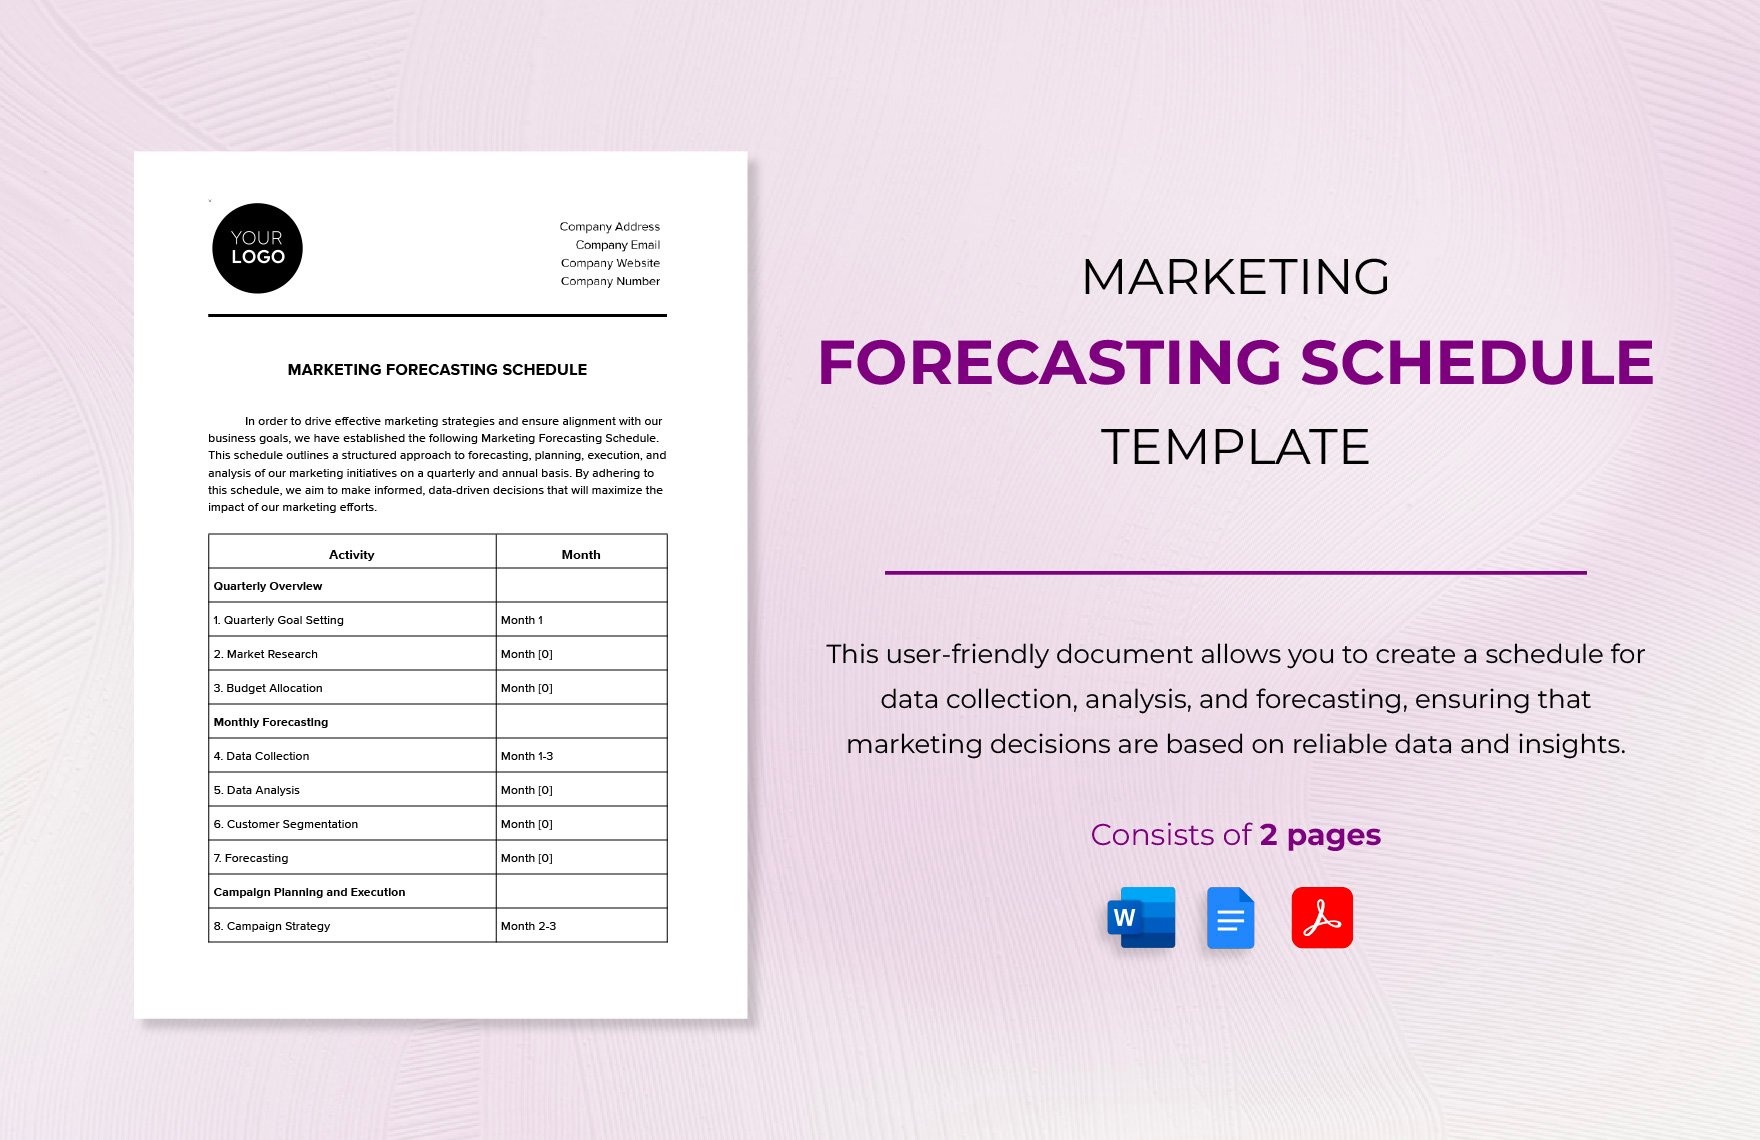 Marketing Forecasting Schedule Template in Word, Google Docs, PDF